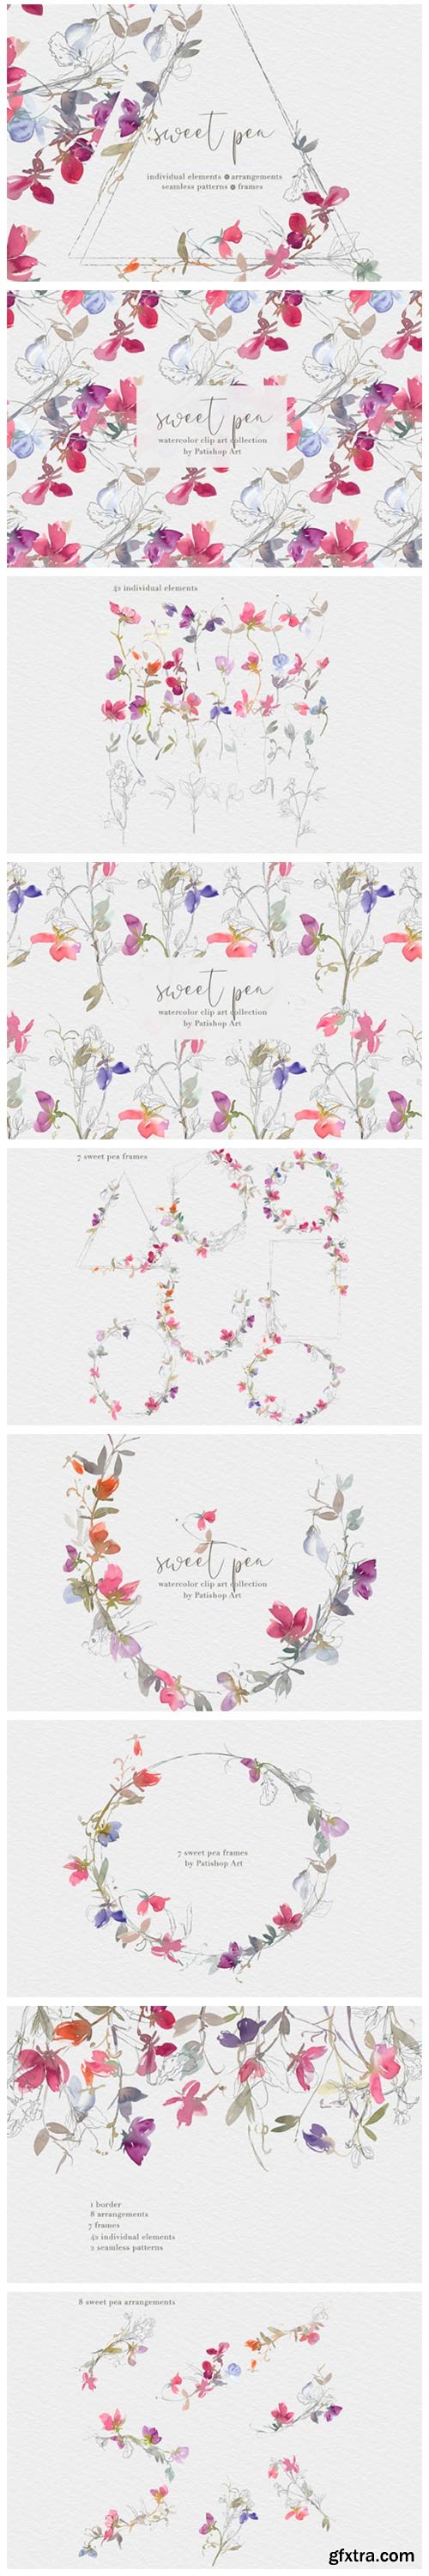 Watercolor Sweet Pea Clipart Collection 4030057